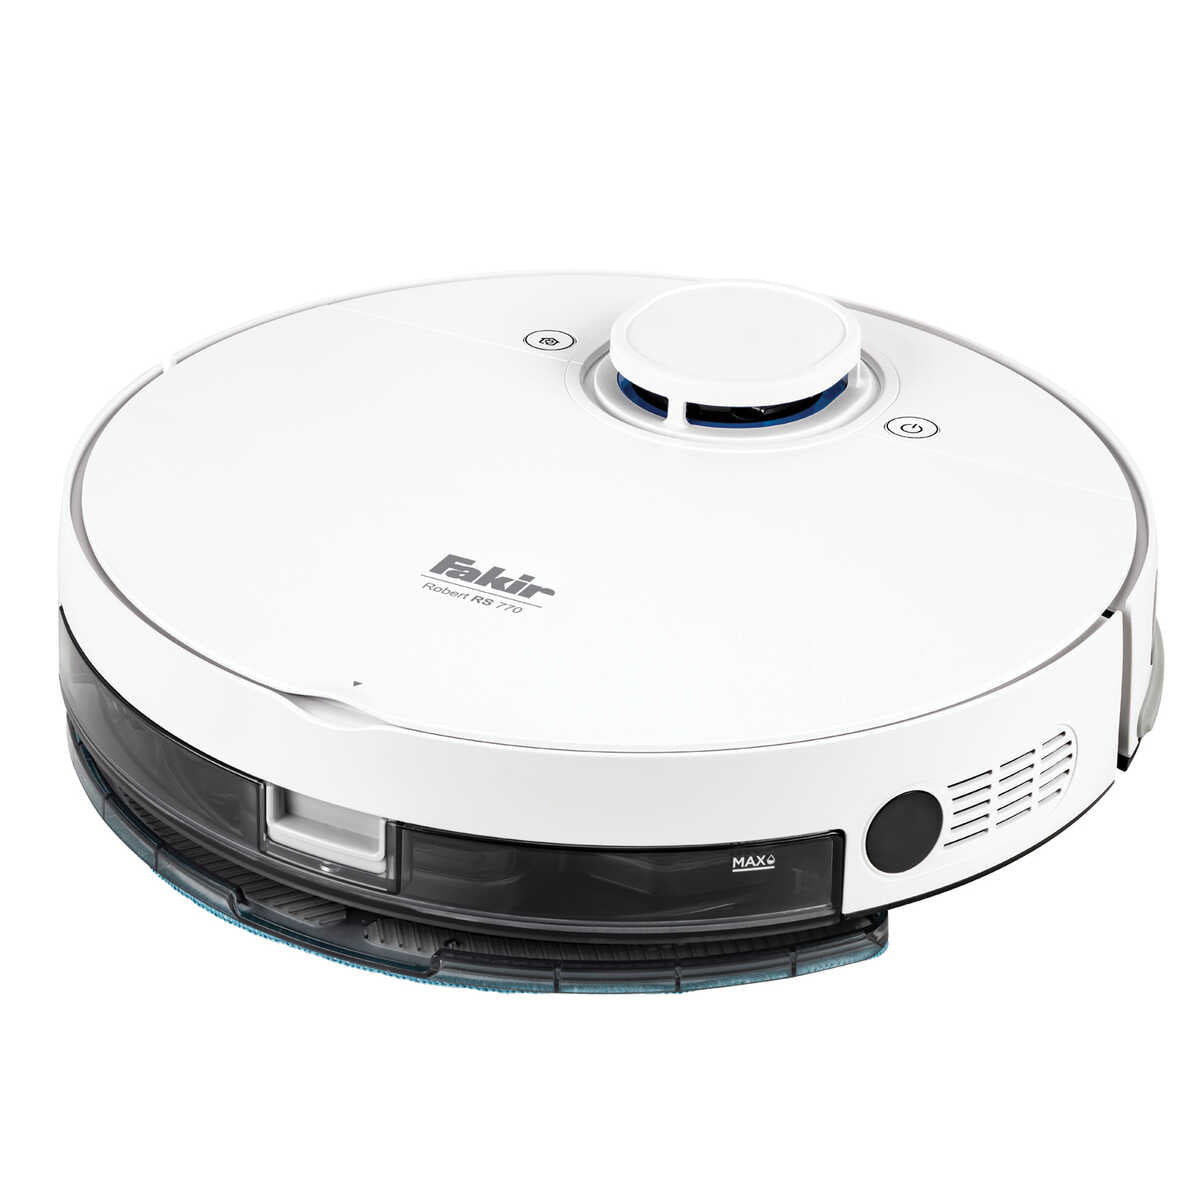 Fakir Robot Vacuum Cleaner With Mop